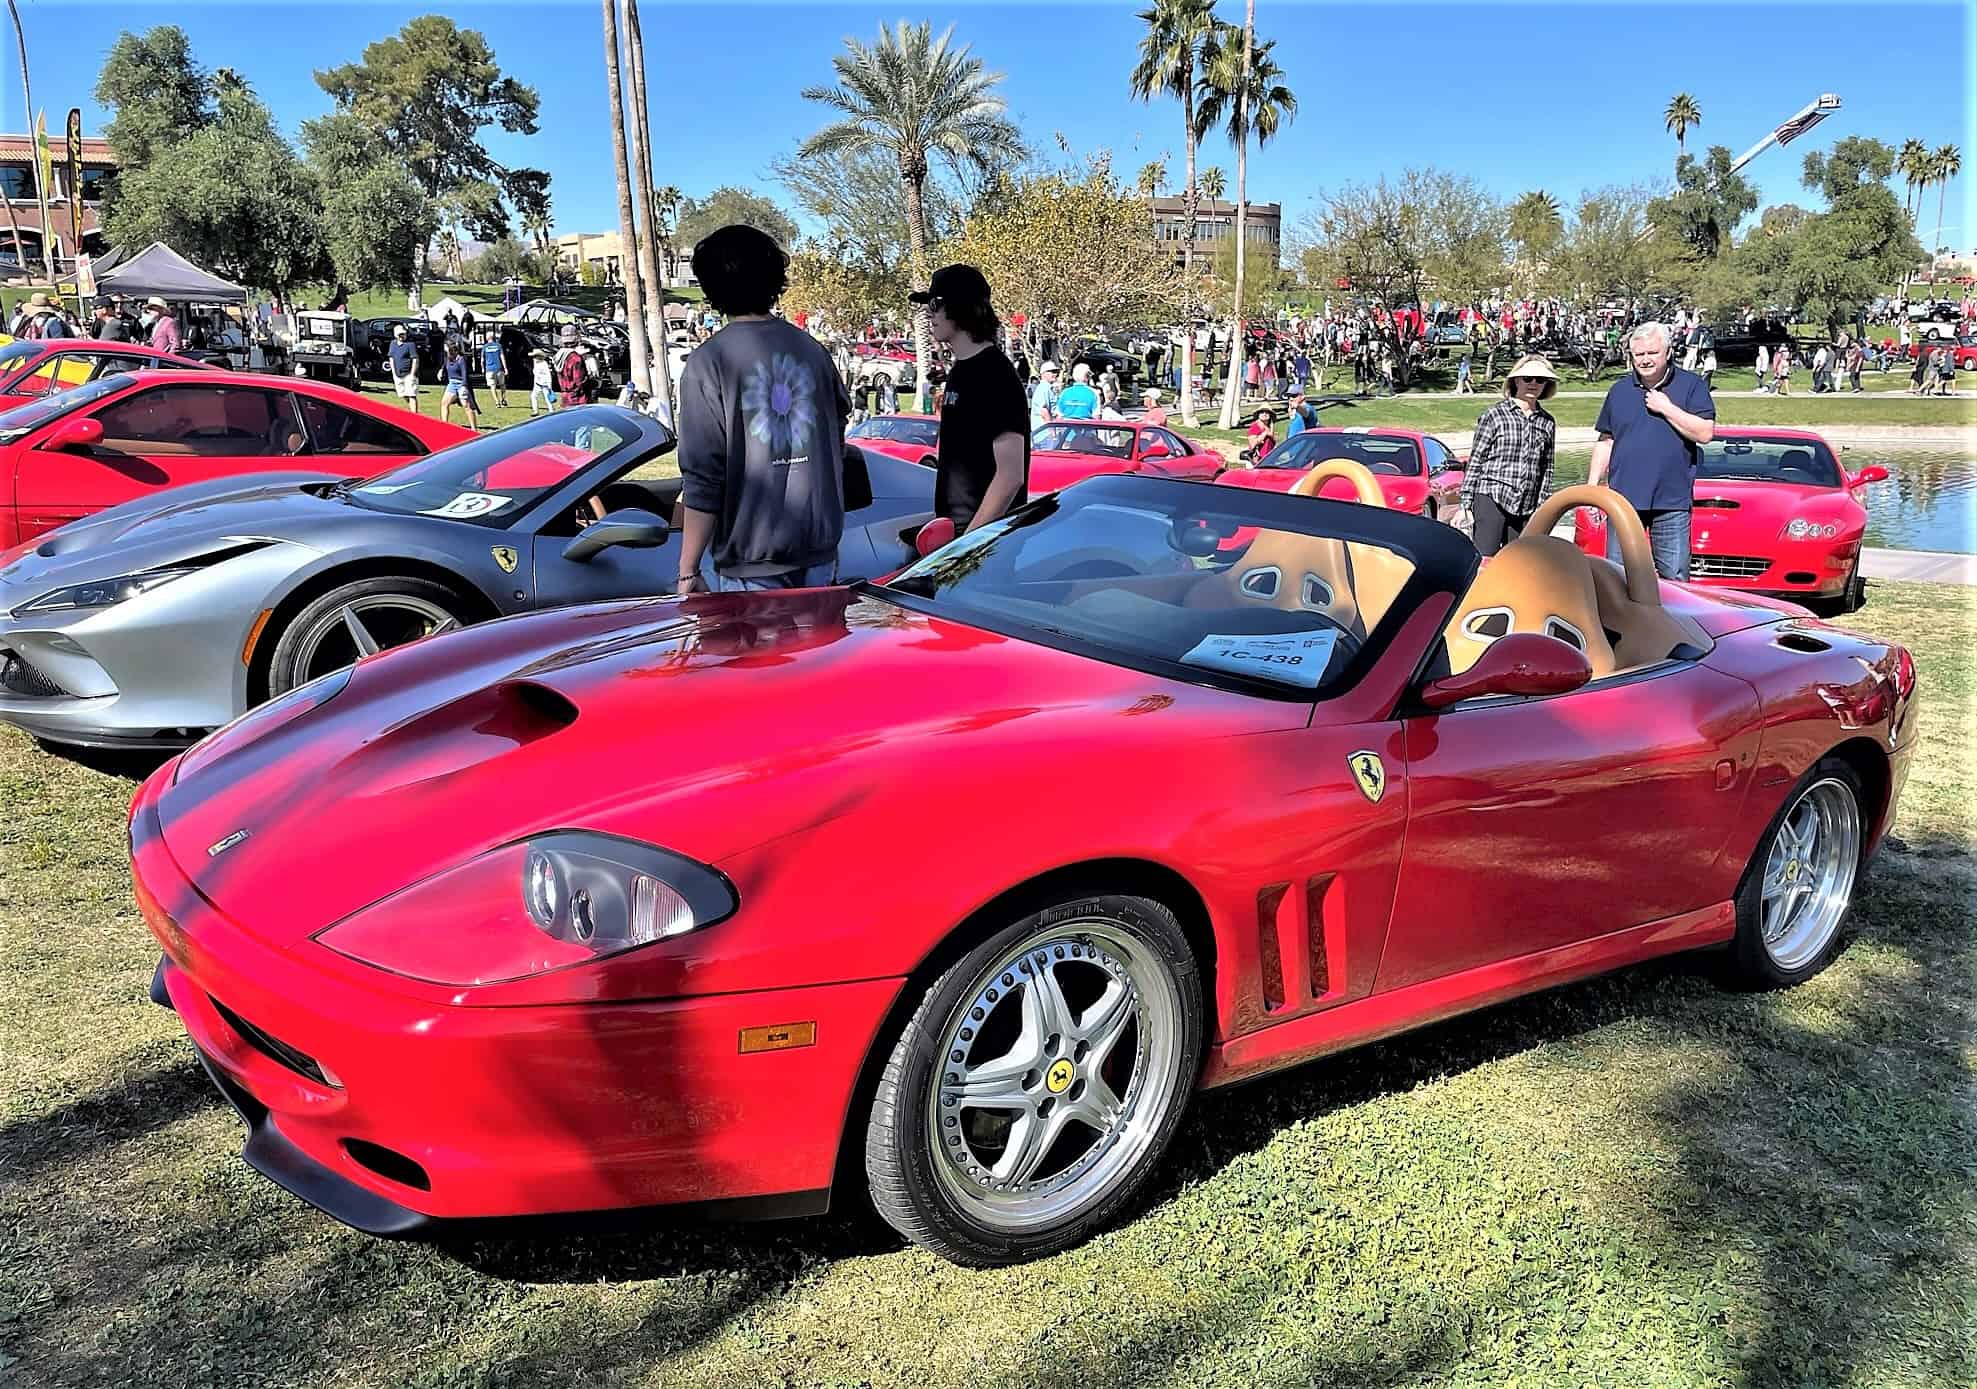 Concours in the Hills reaches record numbers at special Arizona venue